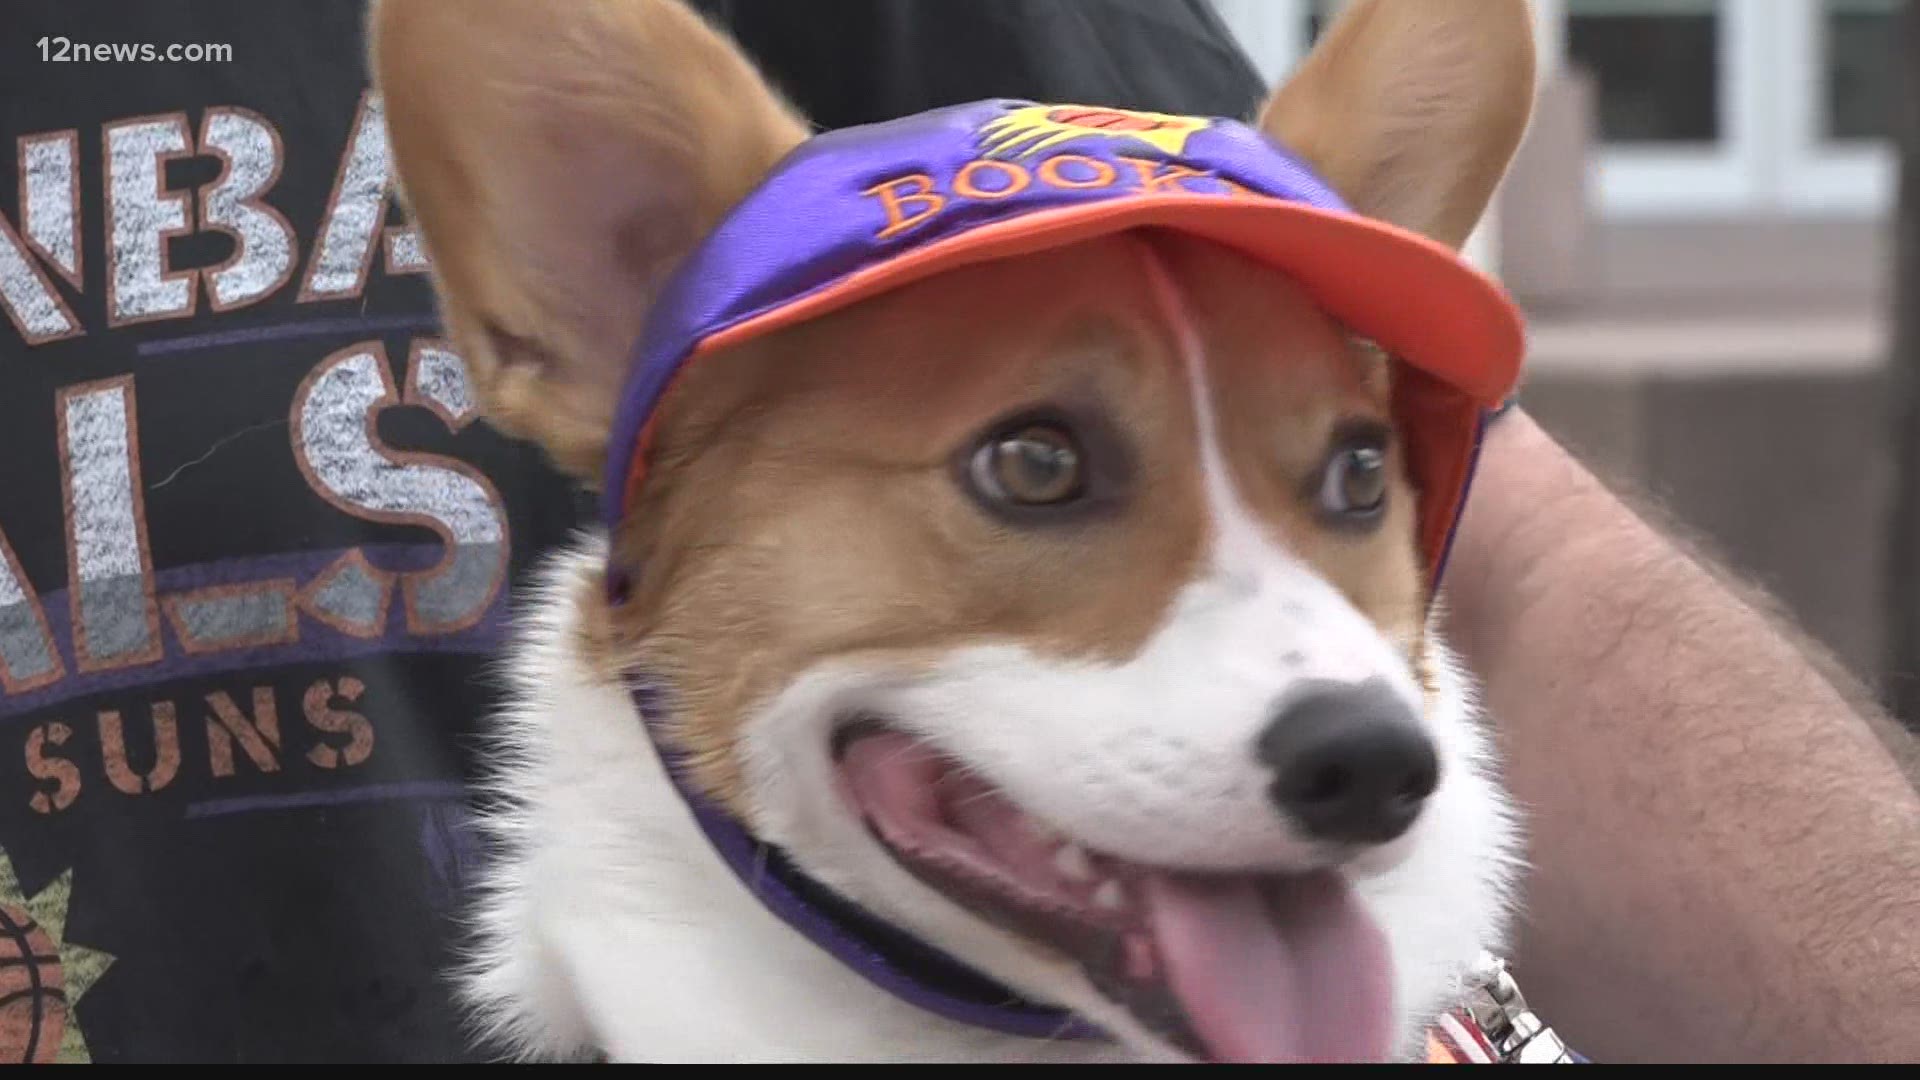 Bacon is a 17-month-old Corgi pup from Chandler, who loves the Suns just like the rest of his family.